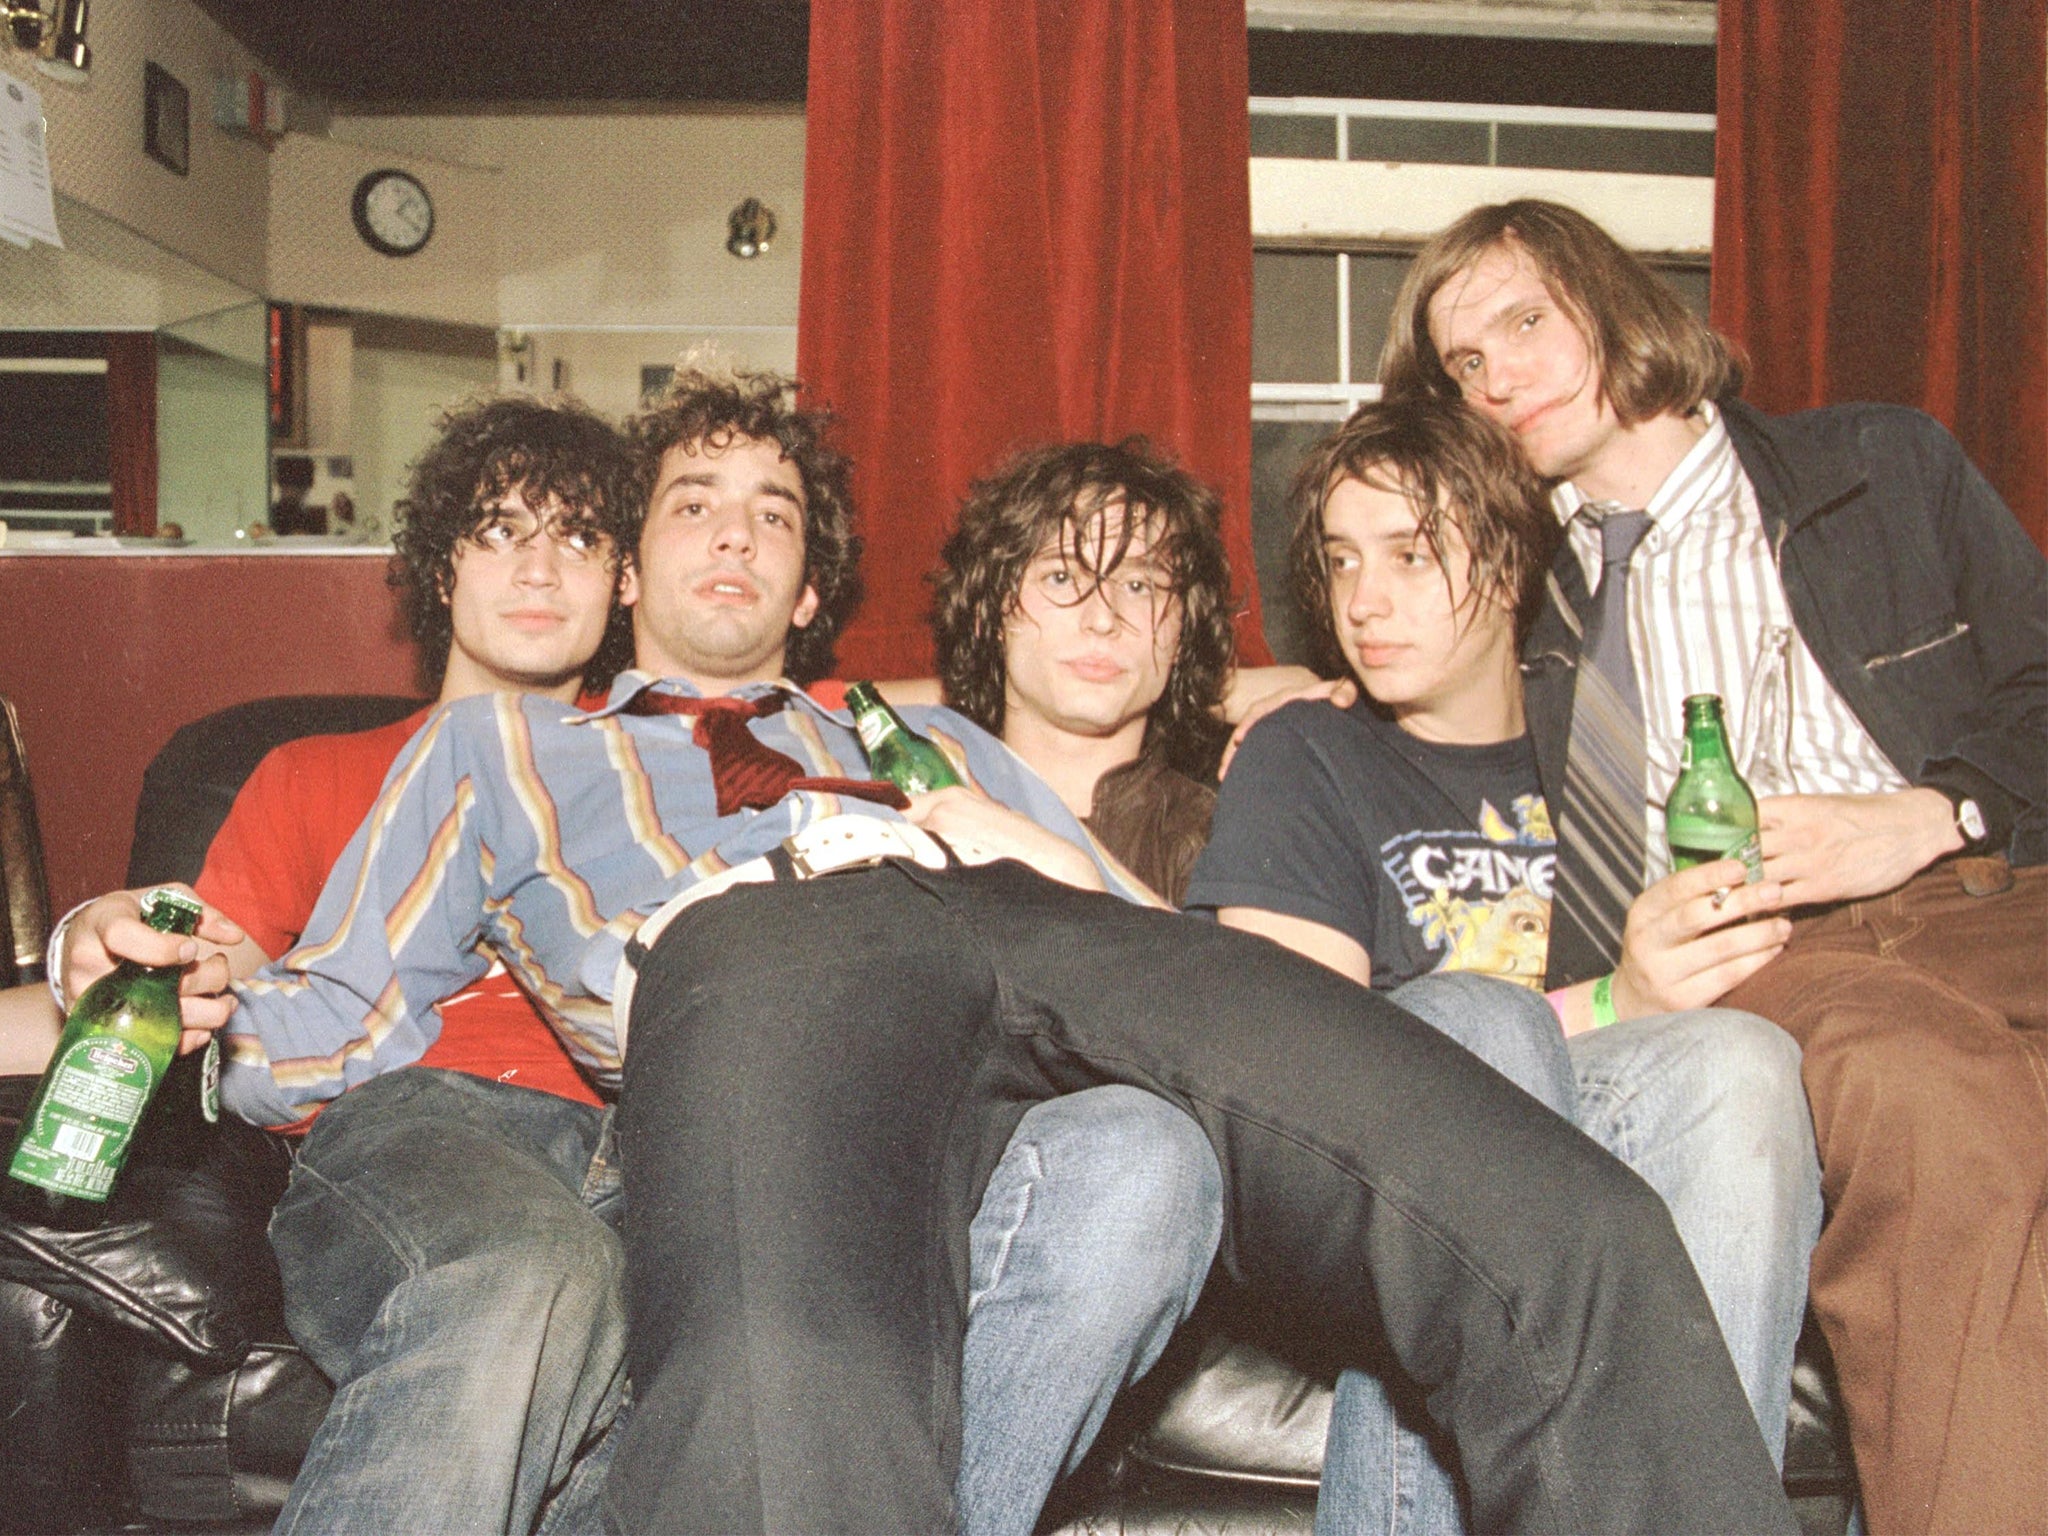 The Strokes exploded onto the scene with their 2001 album ‘Is This It’